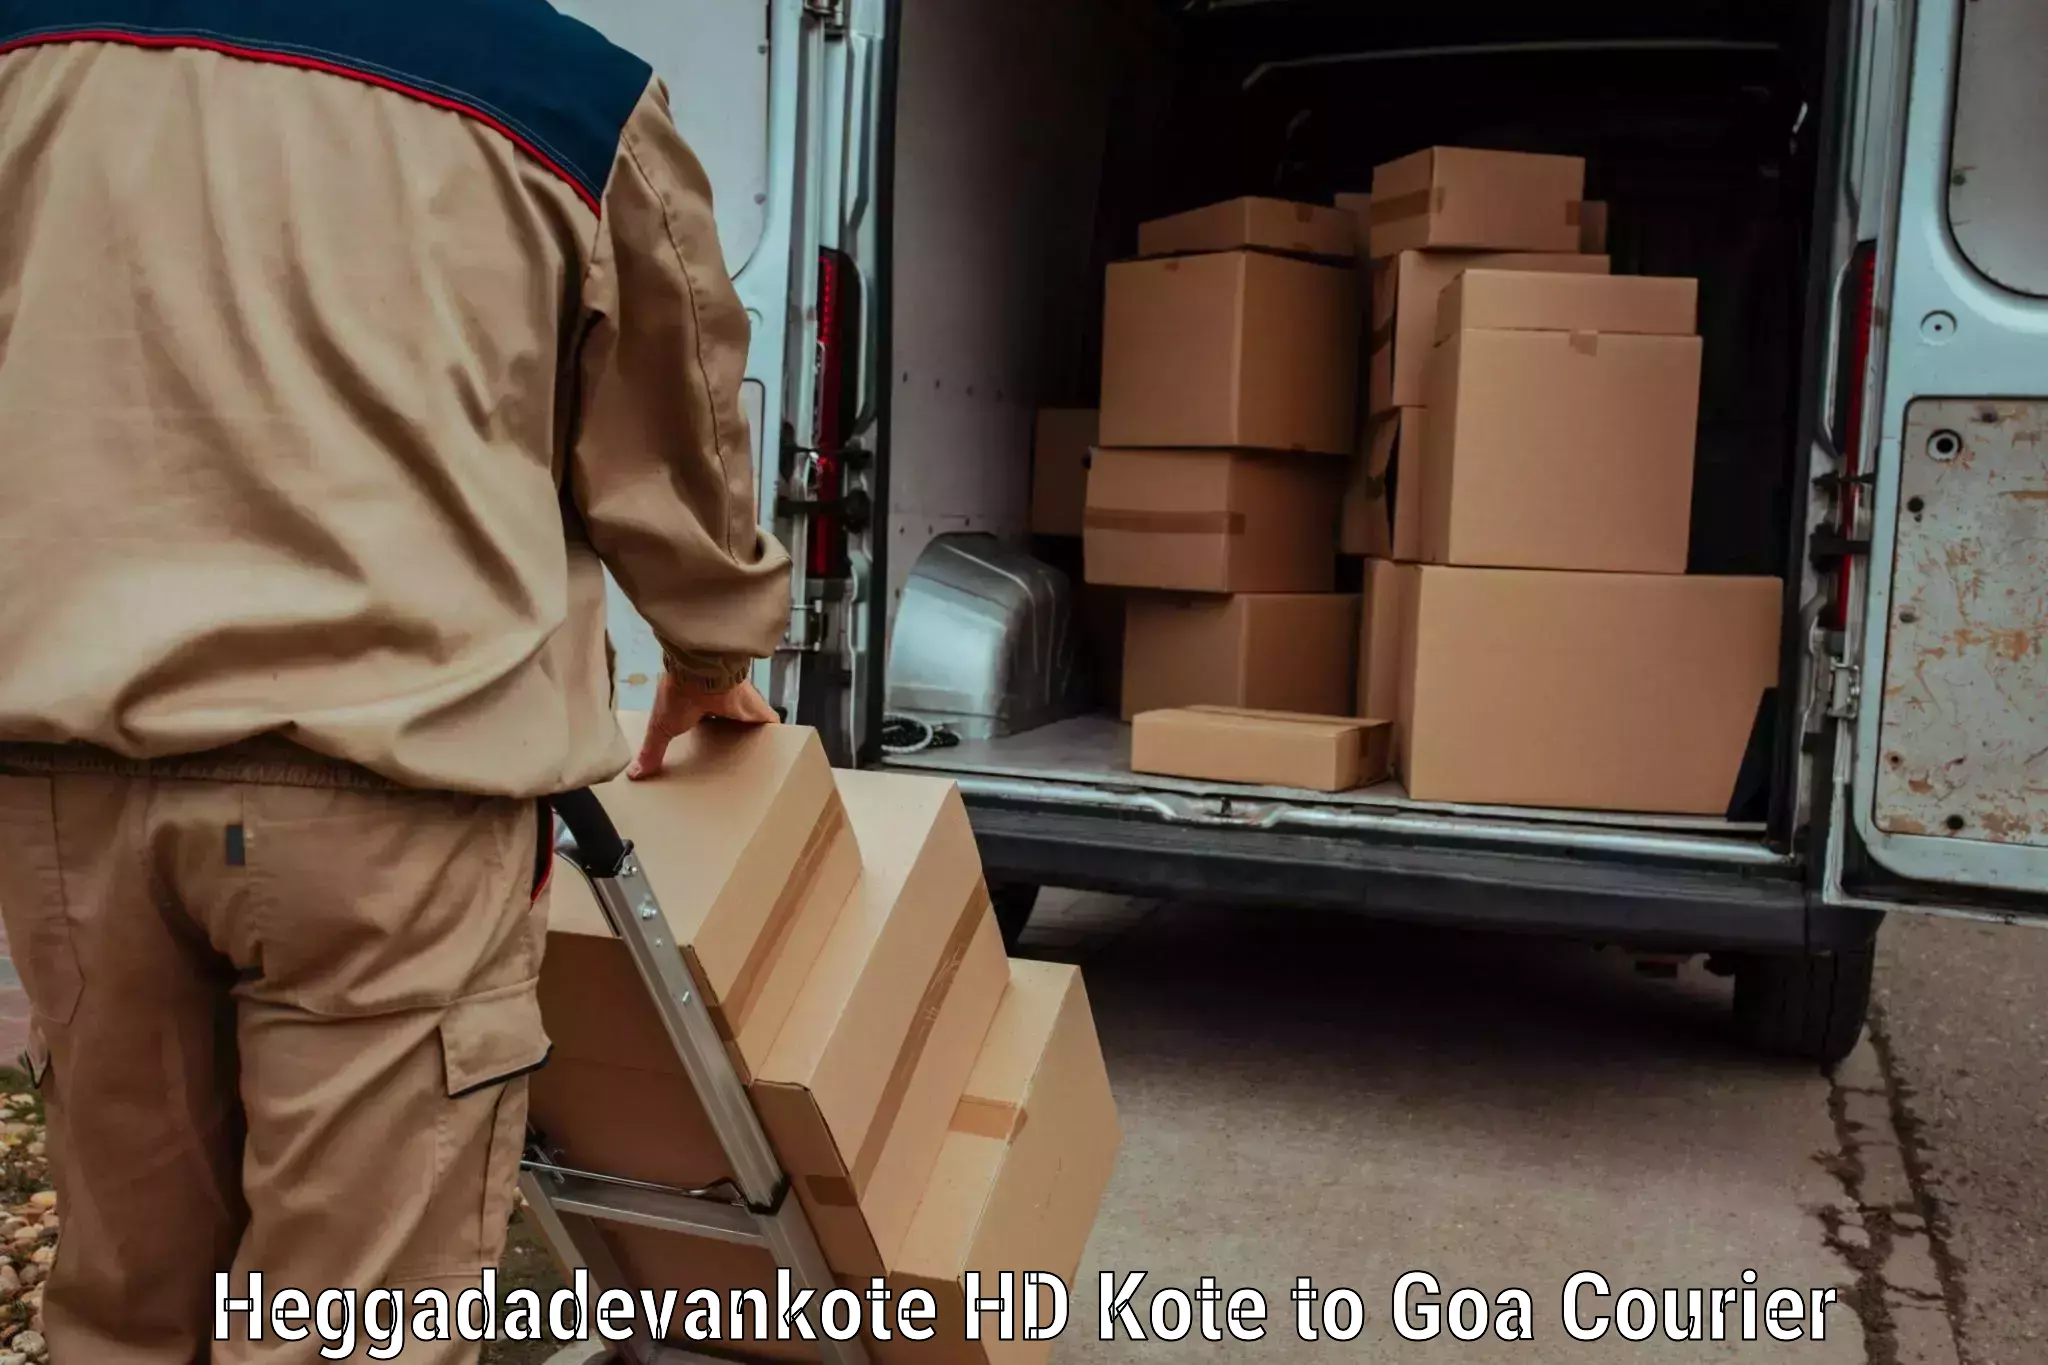 Package tracking in Heggadadevankote HD Kote to South Goa